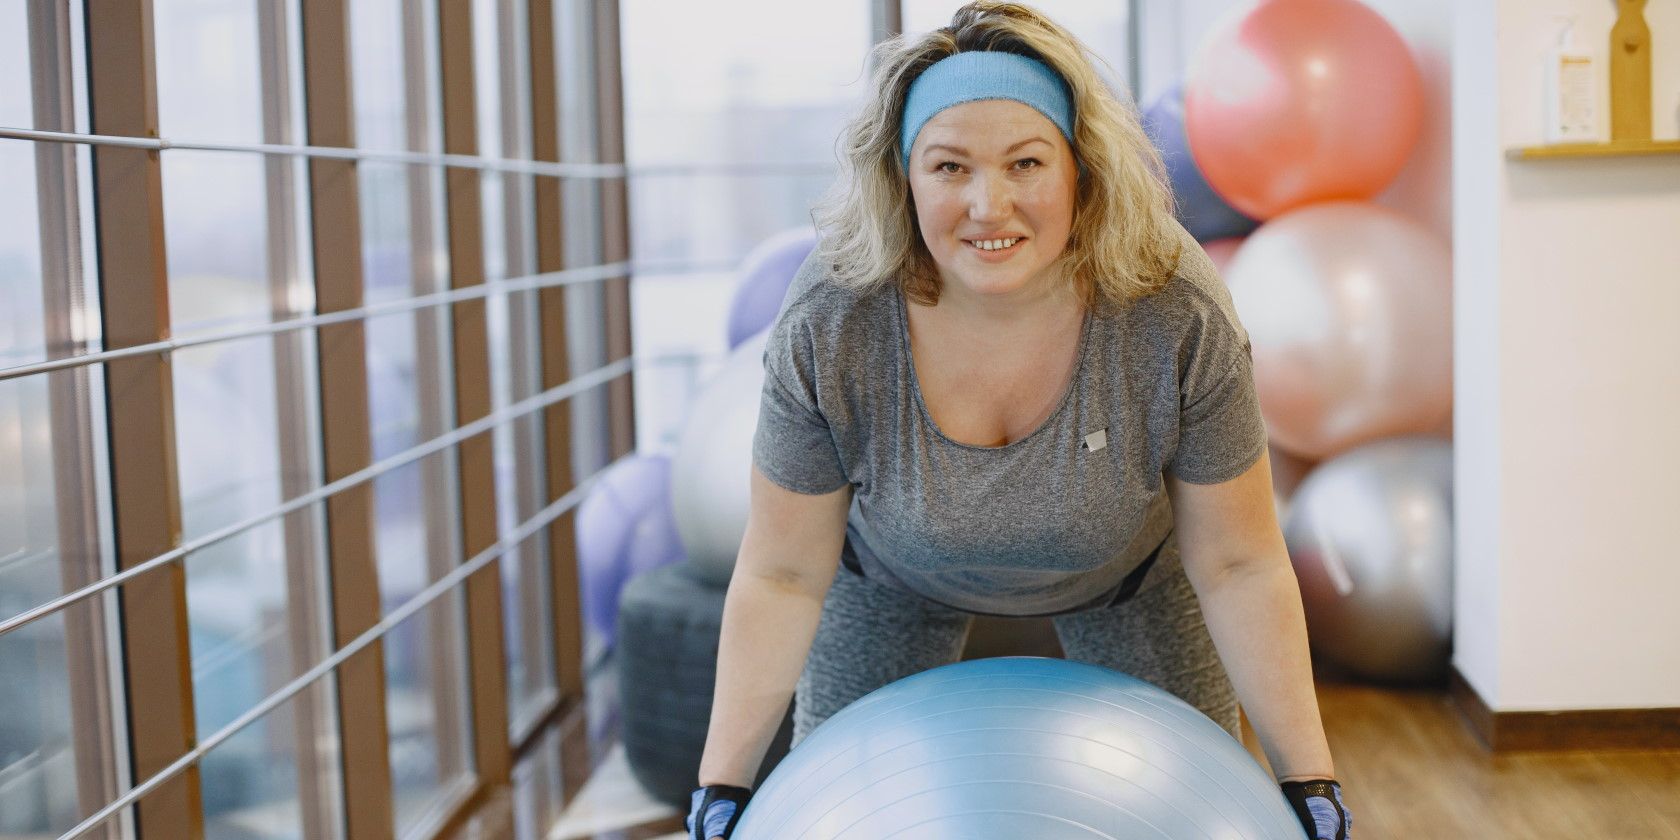 Smiling woman wearing workout clothes and holding exercise ball